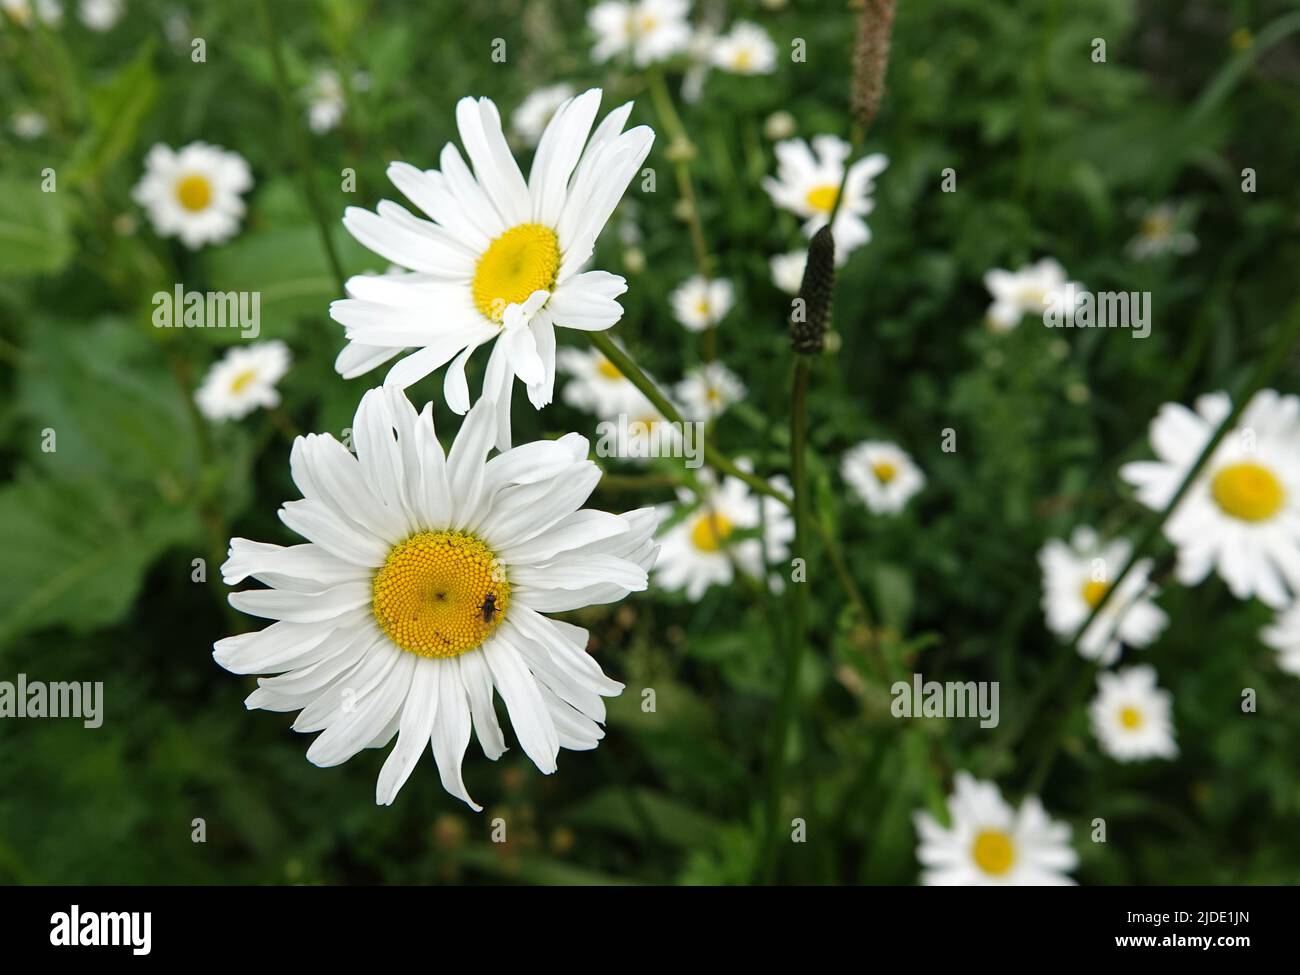 A group of daisies (latin name: leucanthemum vulgare)  blooming is a meadow. On one sits a fly Stock Photo